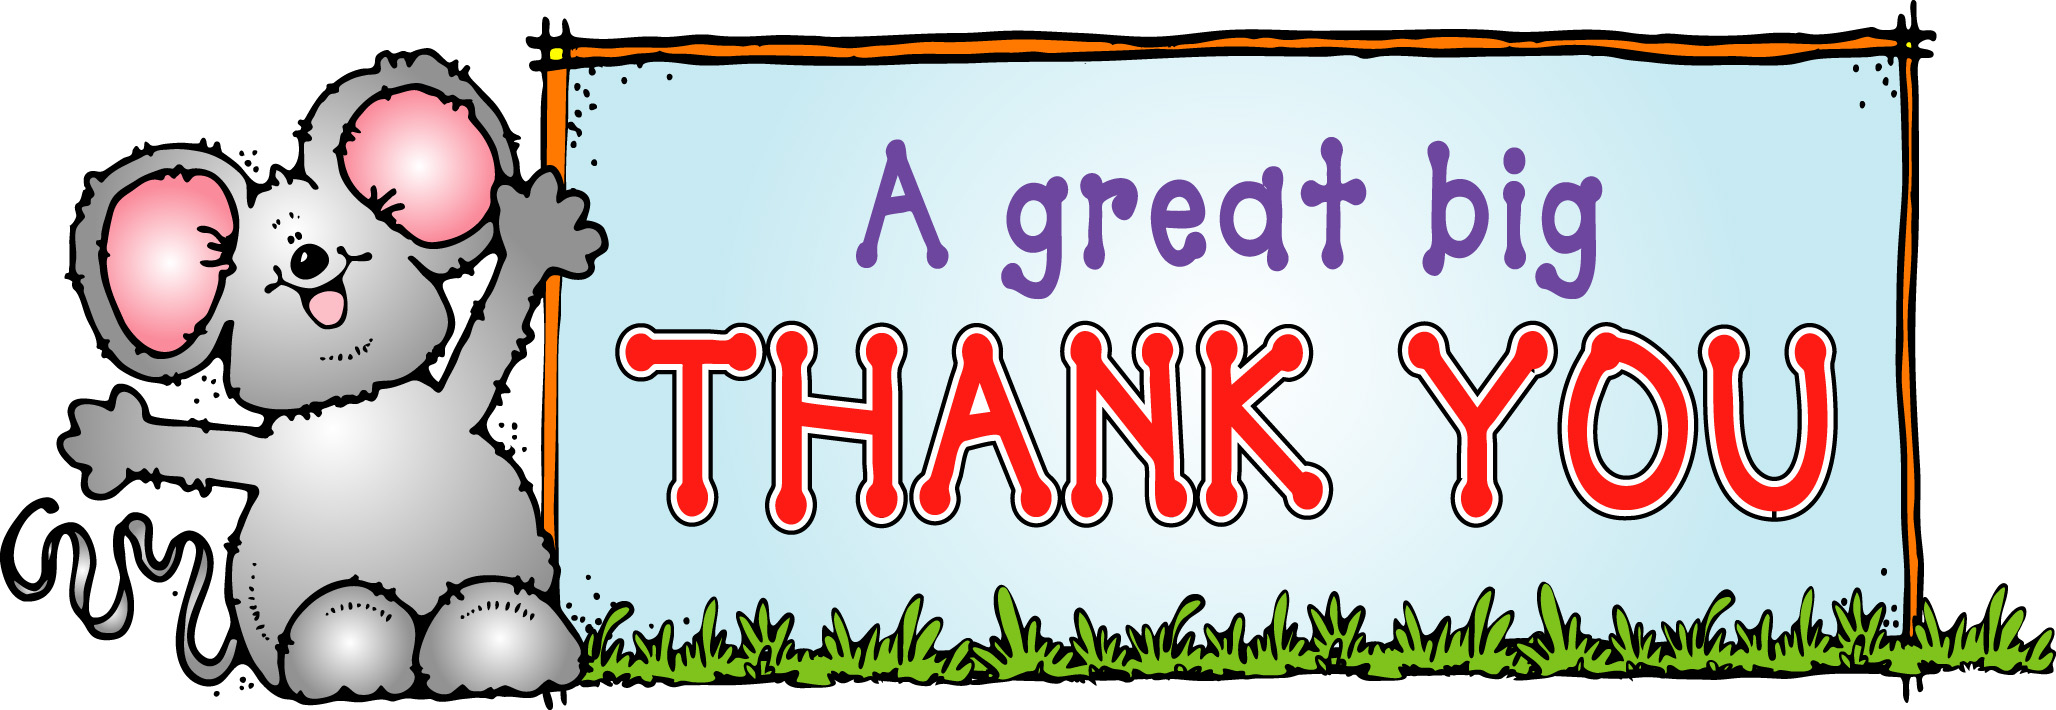 clip art thank you images - photo #42